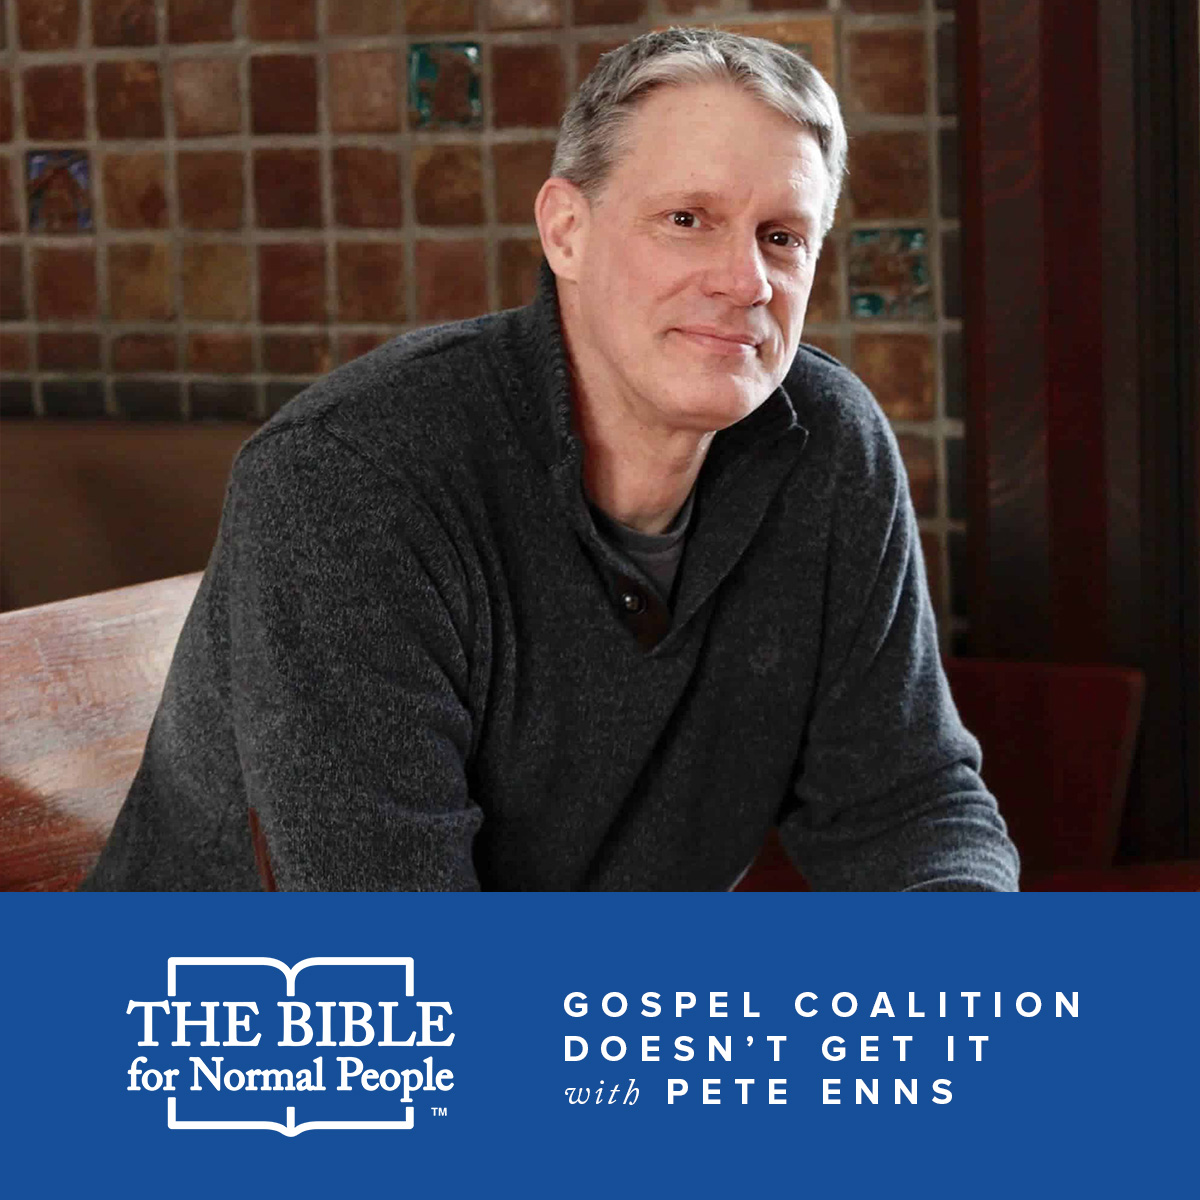 The Gospel Coalition doesn't get progressive christianity and atheism